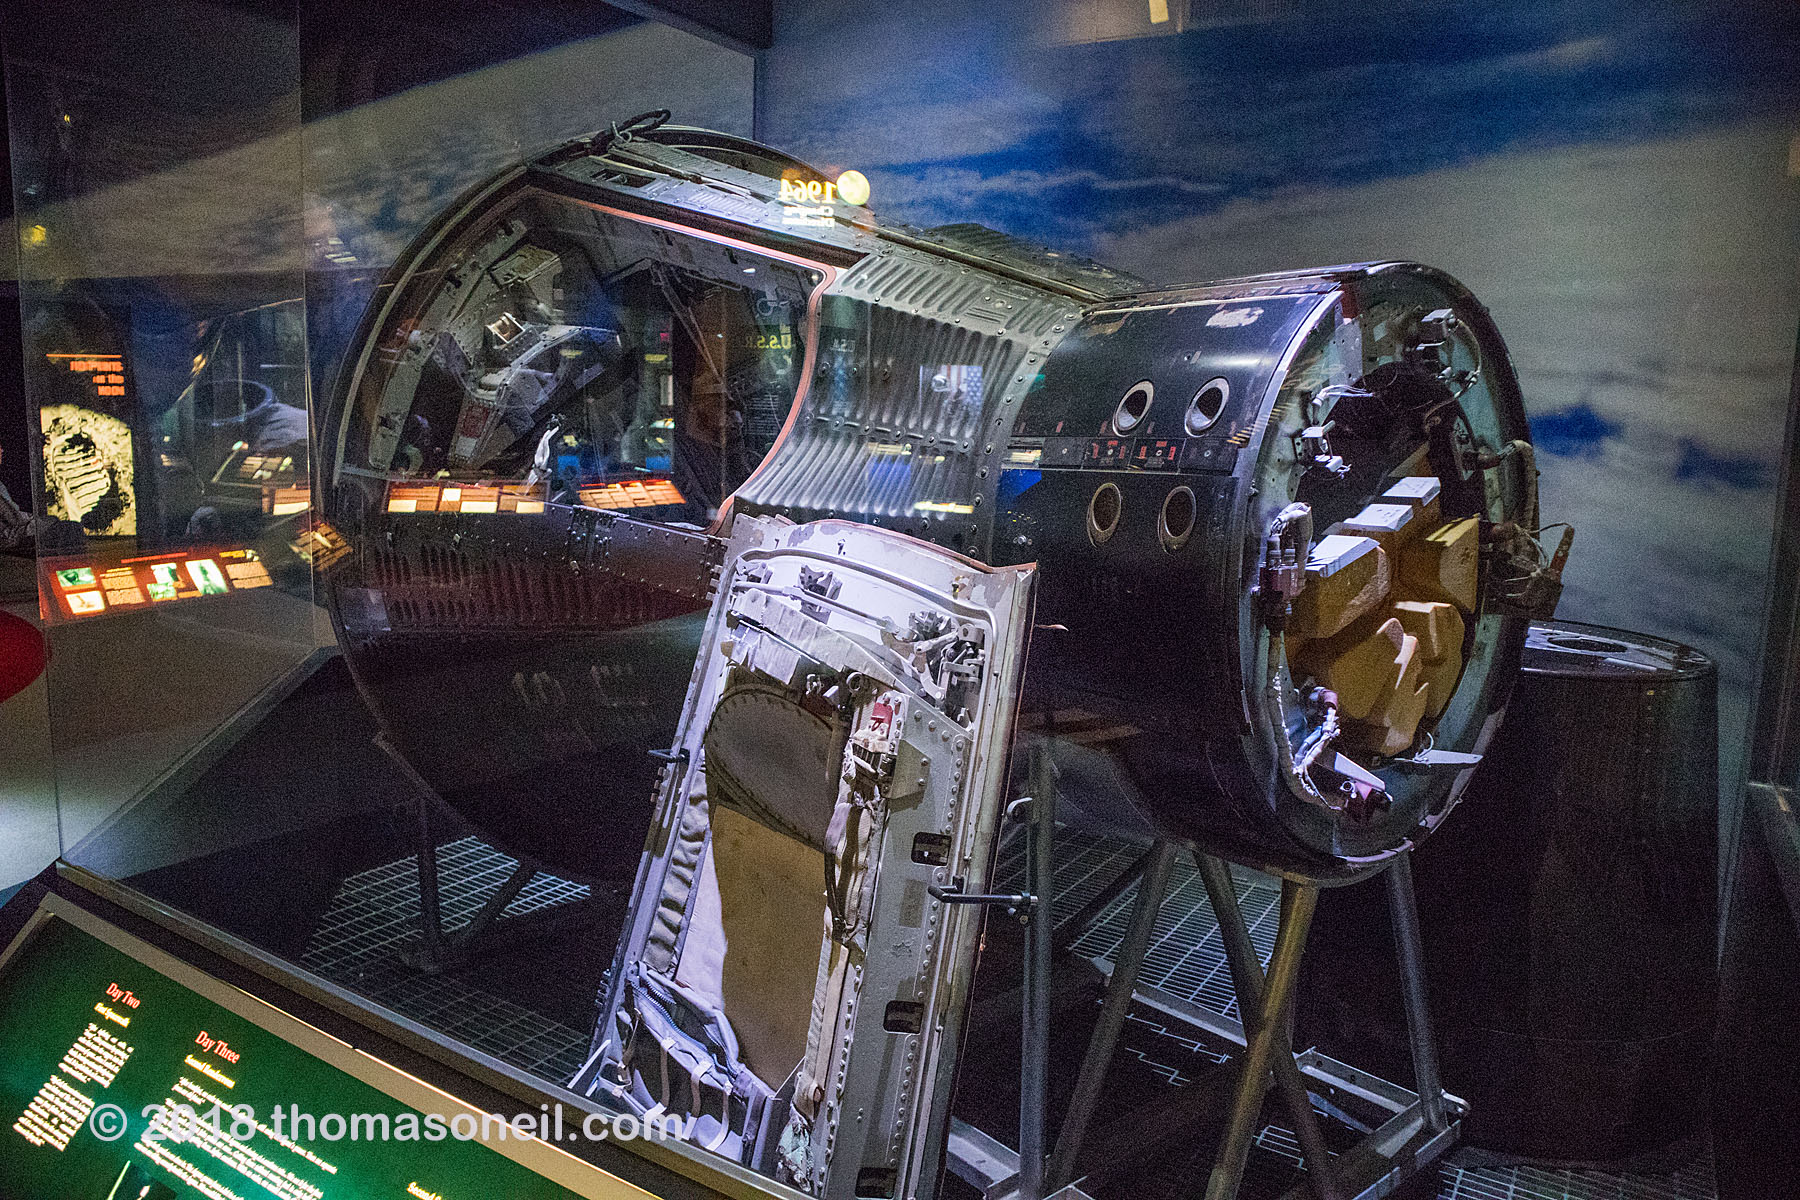 The Gemini X capsule in 2018 at the Kansas Cosmosphere.  Click for next photo.